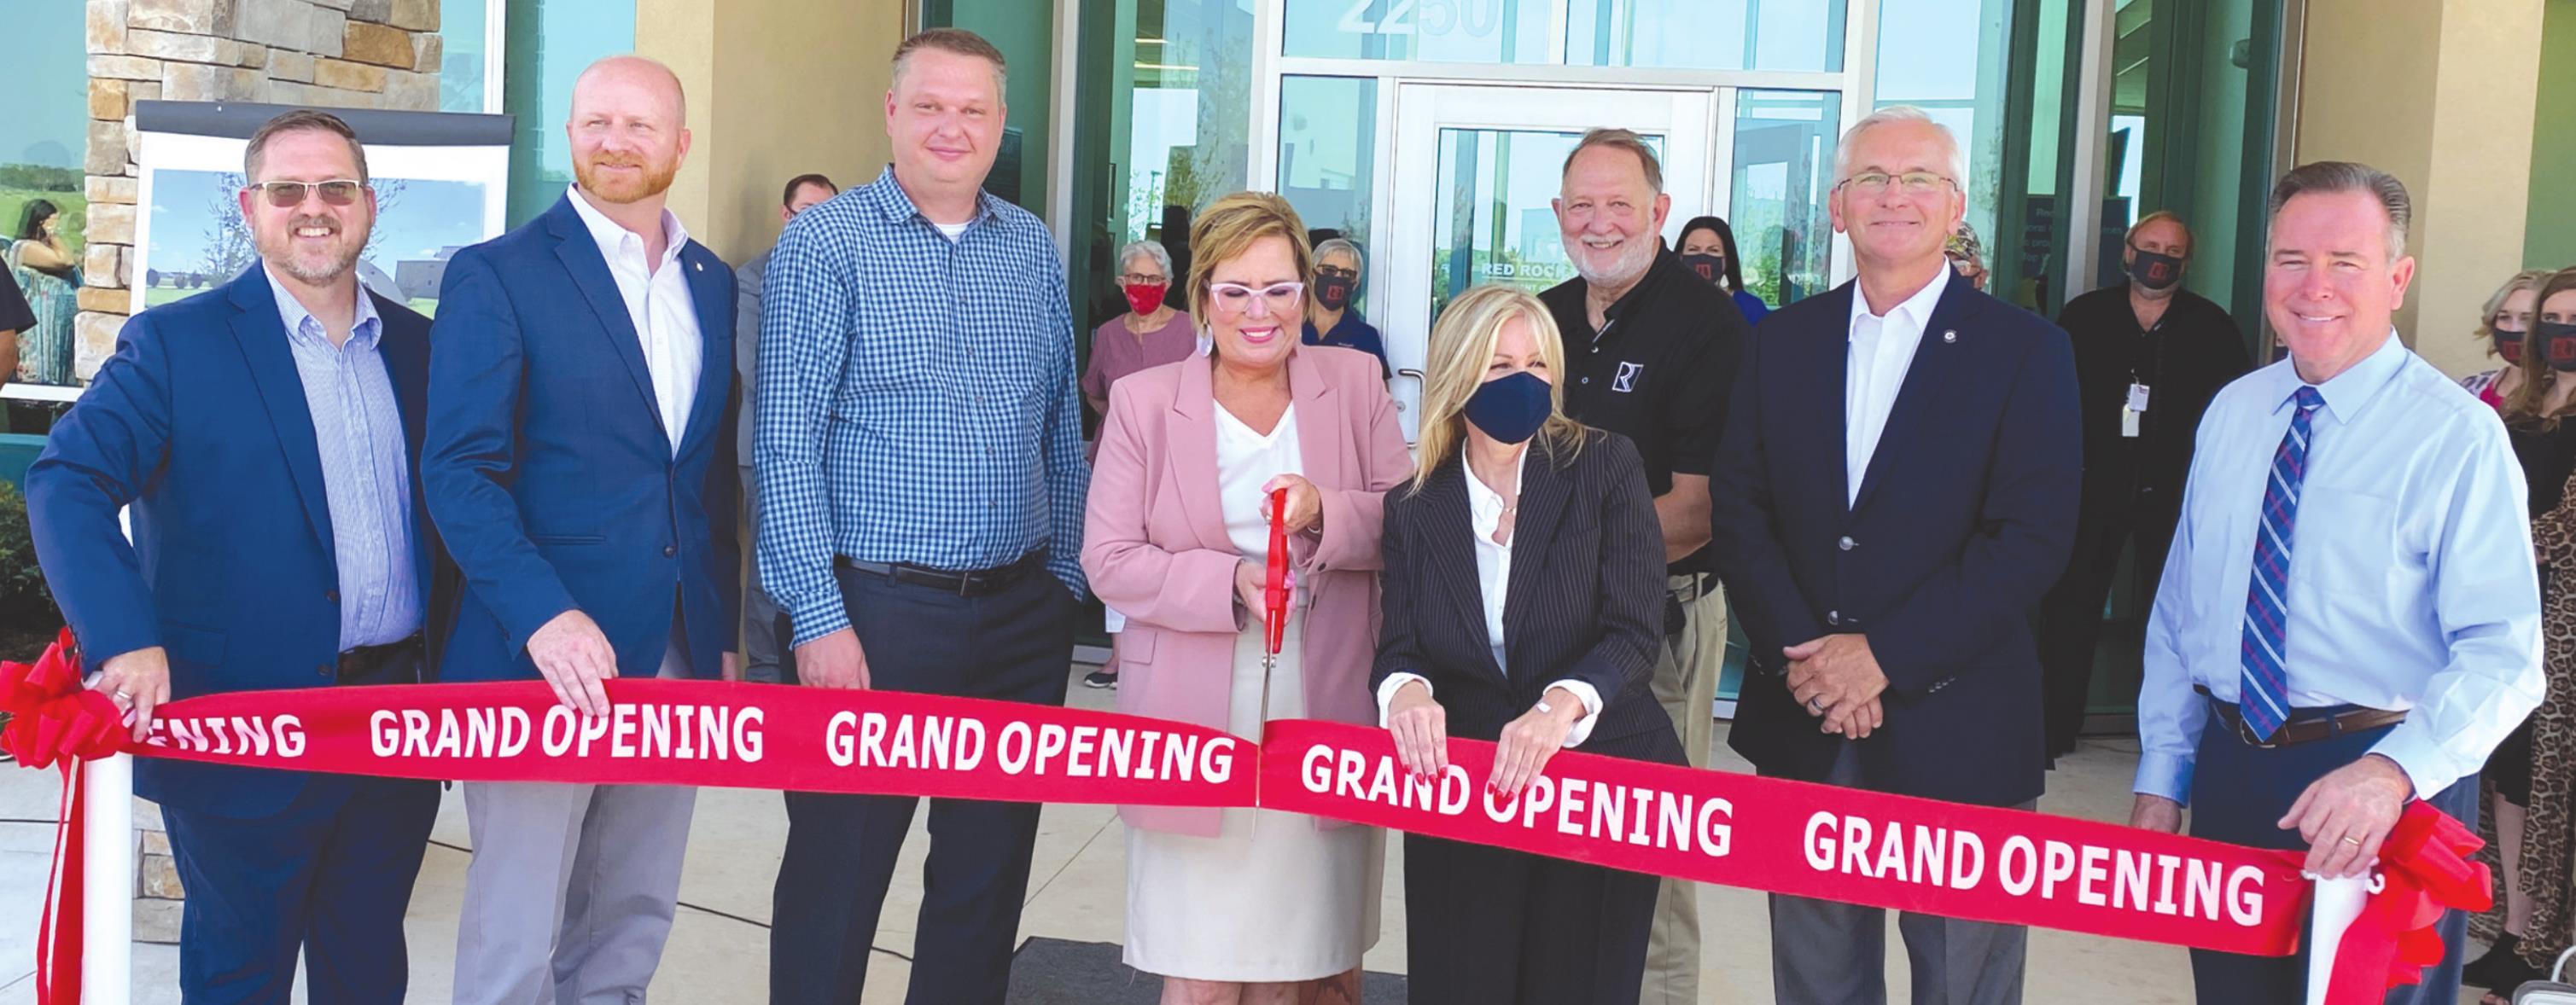 CEO Verna Foust, center, cuts the ribbon for Red Rock Behavorial Health Services as they celebrate their grand opening ribbon cutting Friday for their new facility. From left are Jason Cornelius, Sen. Brent Howard, Kile Kuykendall, Foust, Carrie Slatton-Hodges, Sen. Darcy Jech and Rep. Todd Russ. Phillip Reid/WDN